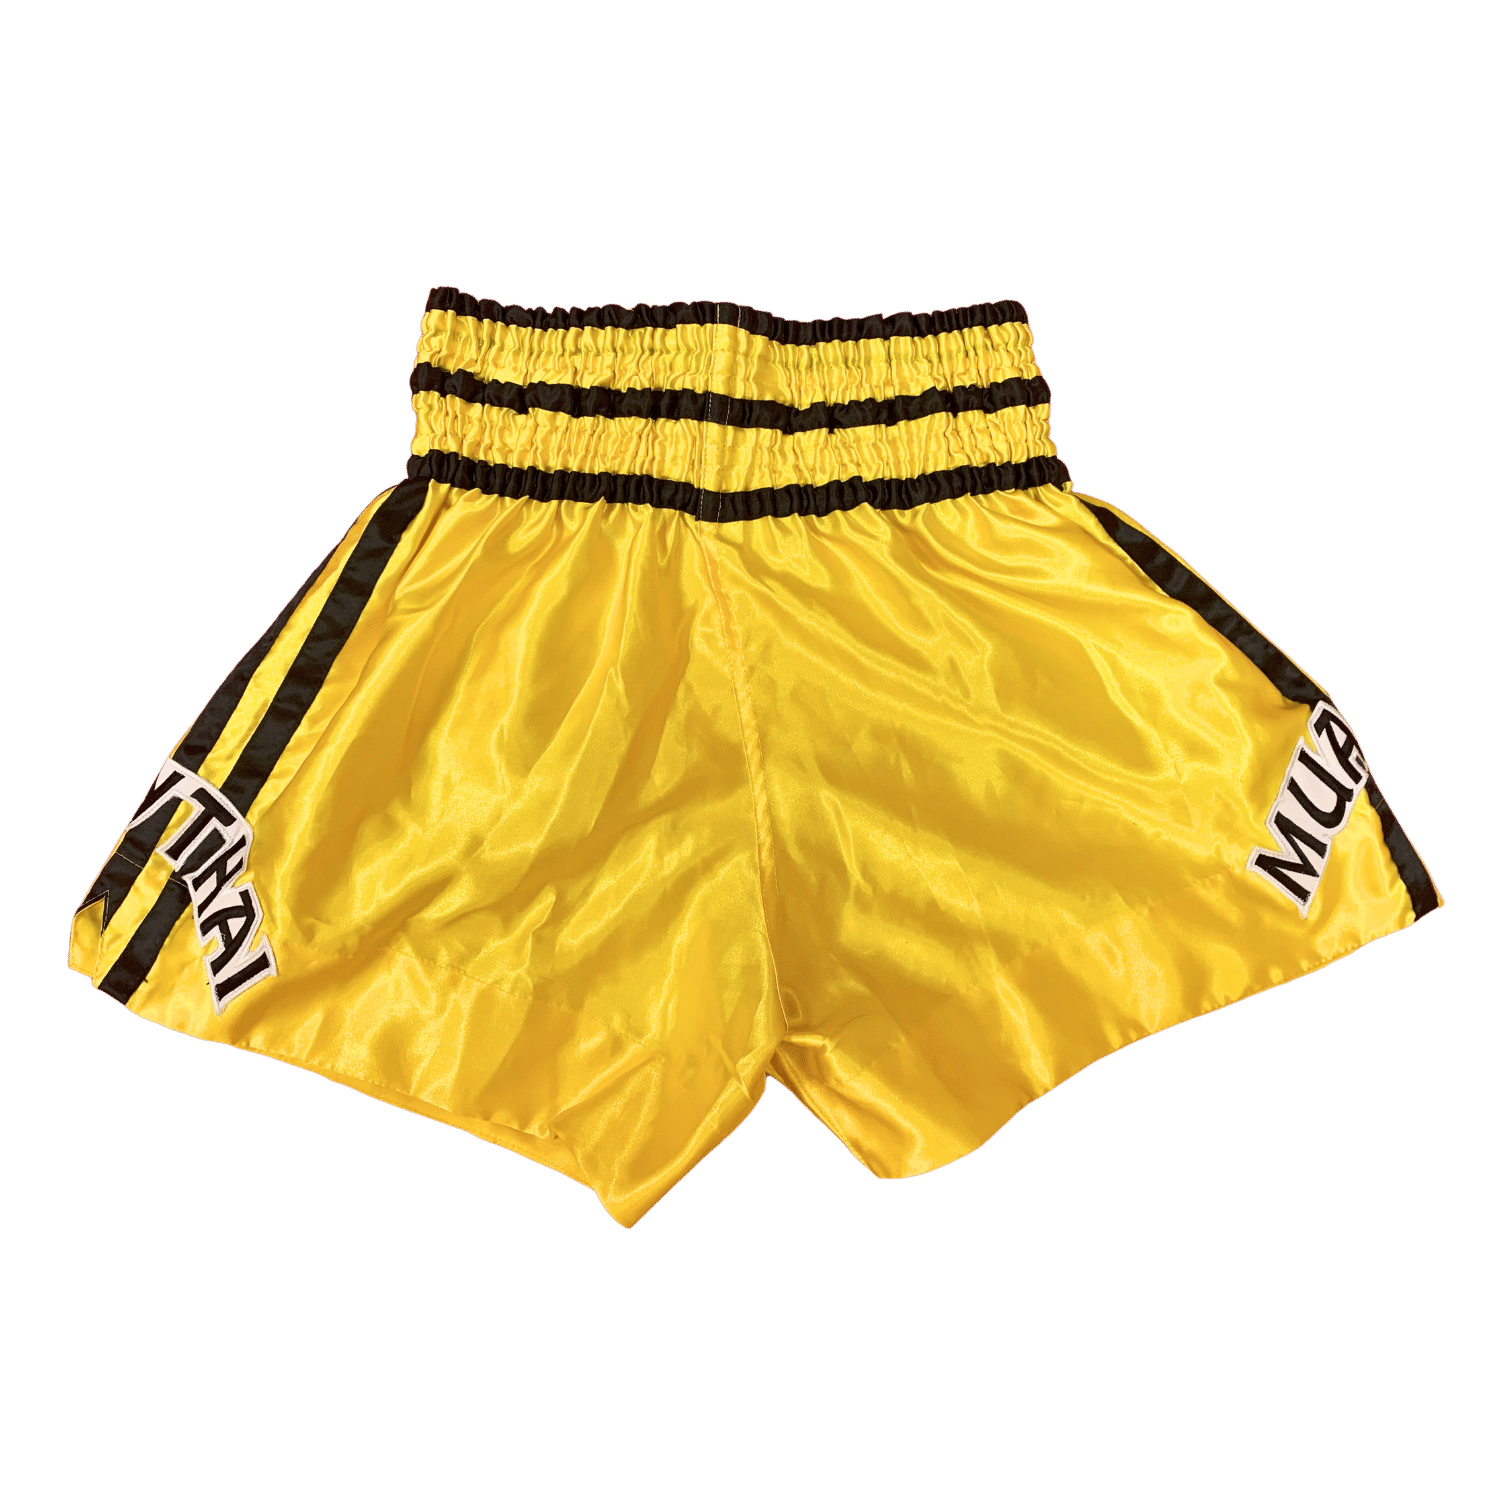 A pair of Red Bull Charge Muay Thai boxing shorts with black and yellow stripes at Hanuthai's Gym.